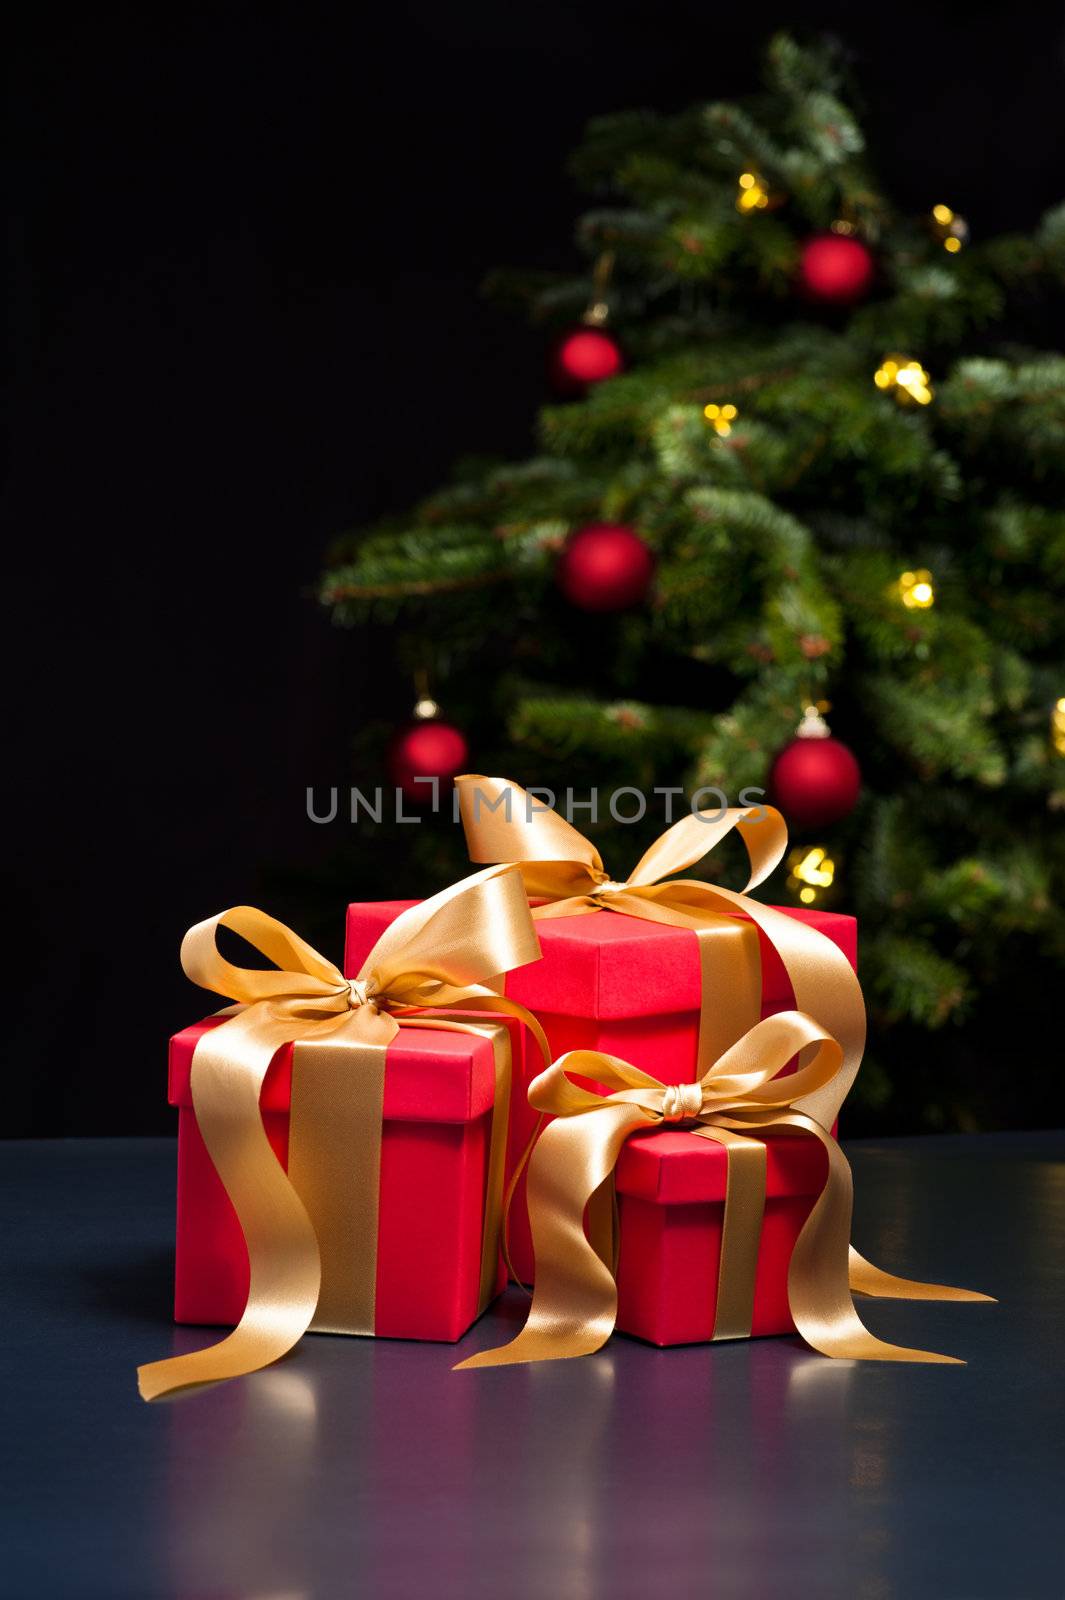 Three presents with gold ribbon in an elegant Christmas setting